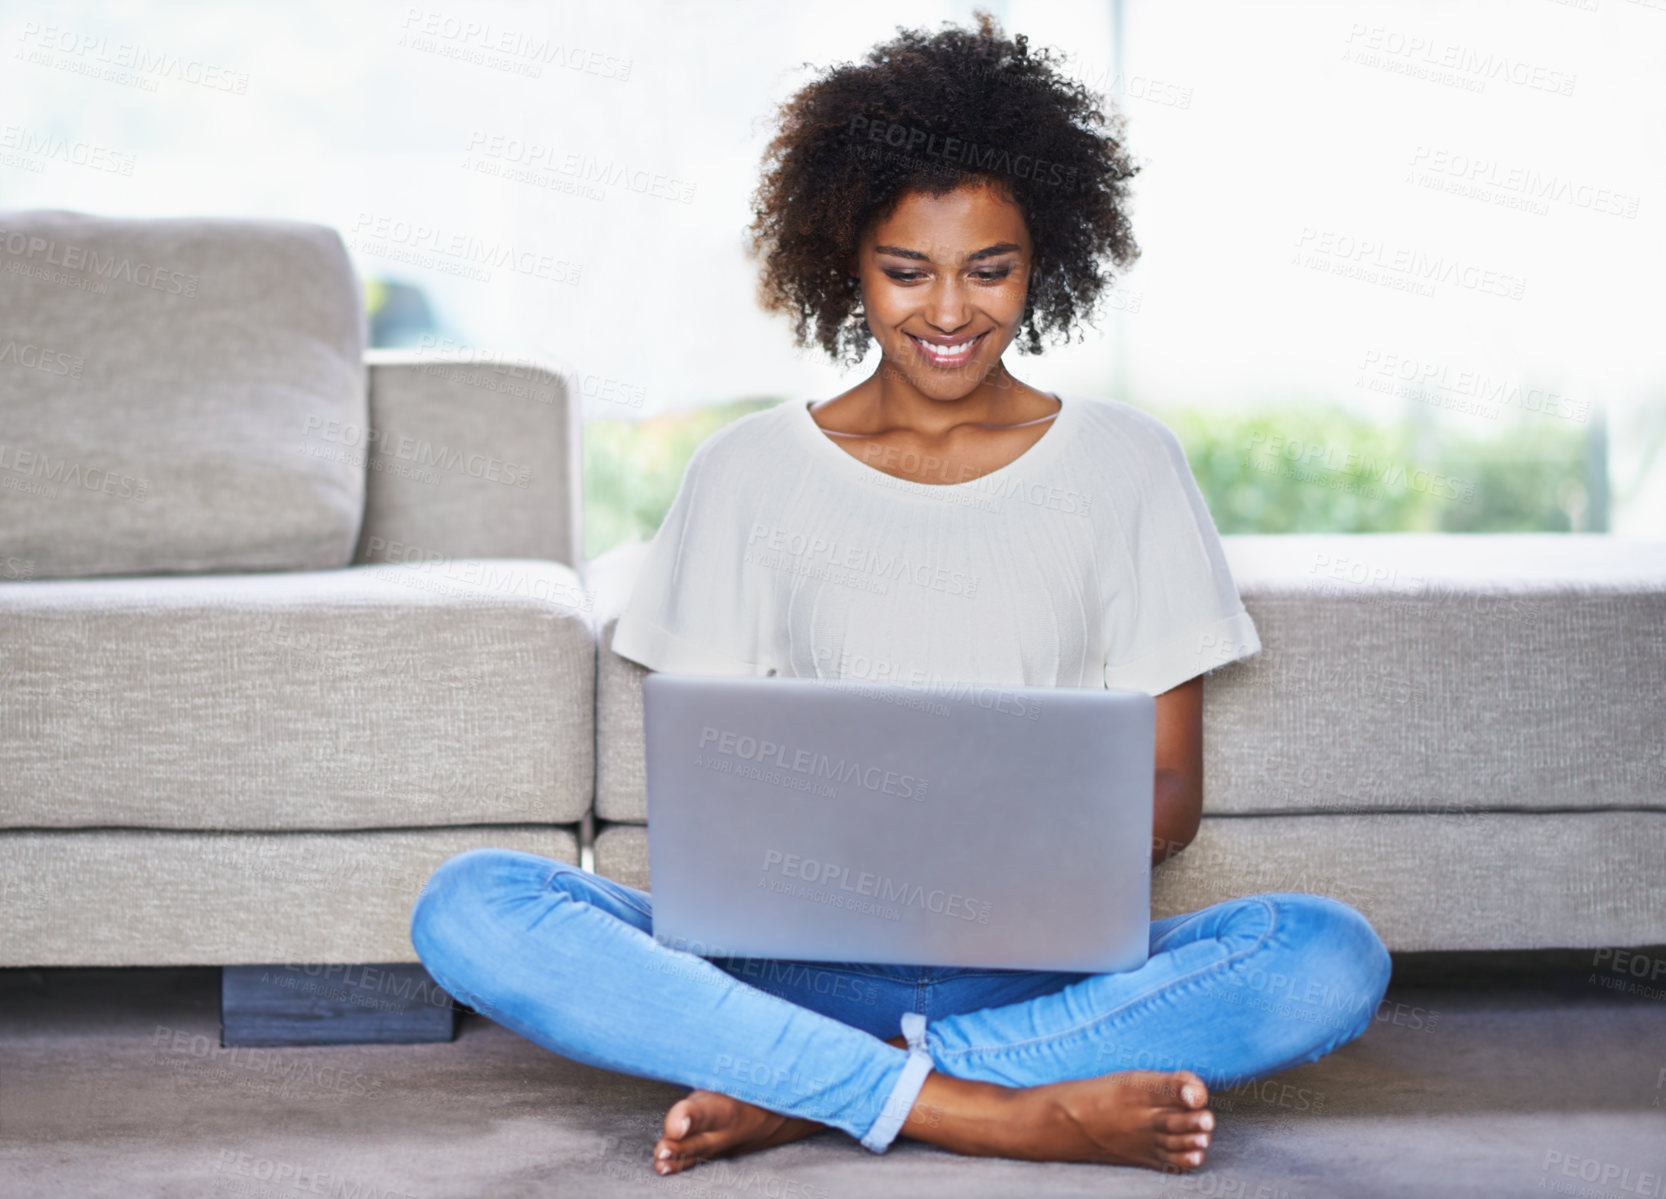 Buy stock photo Shot of a young woman using a laptop while relaxing at home